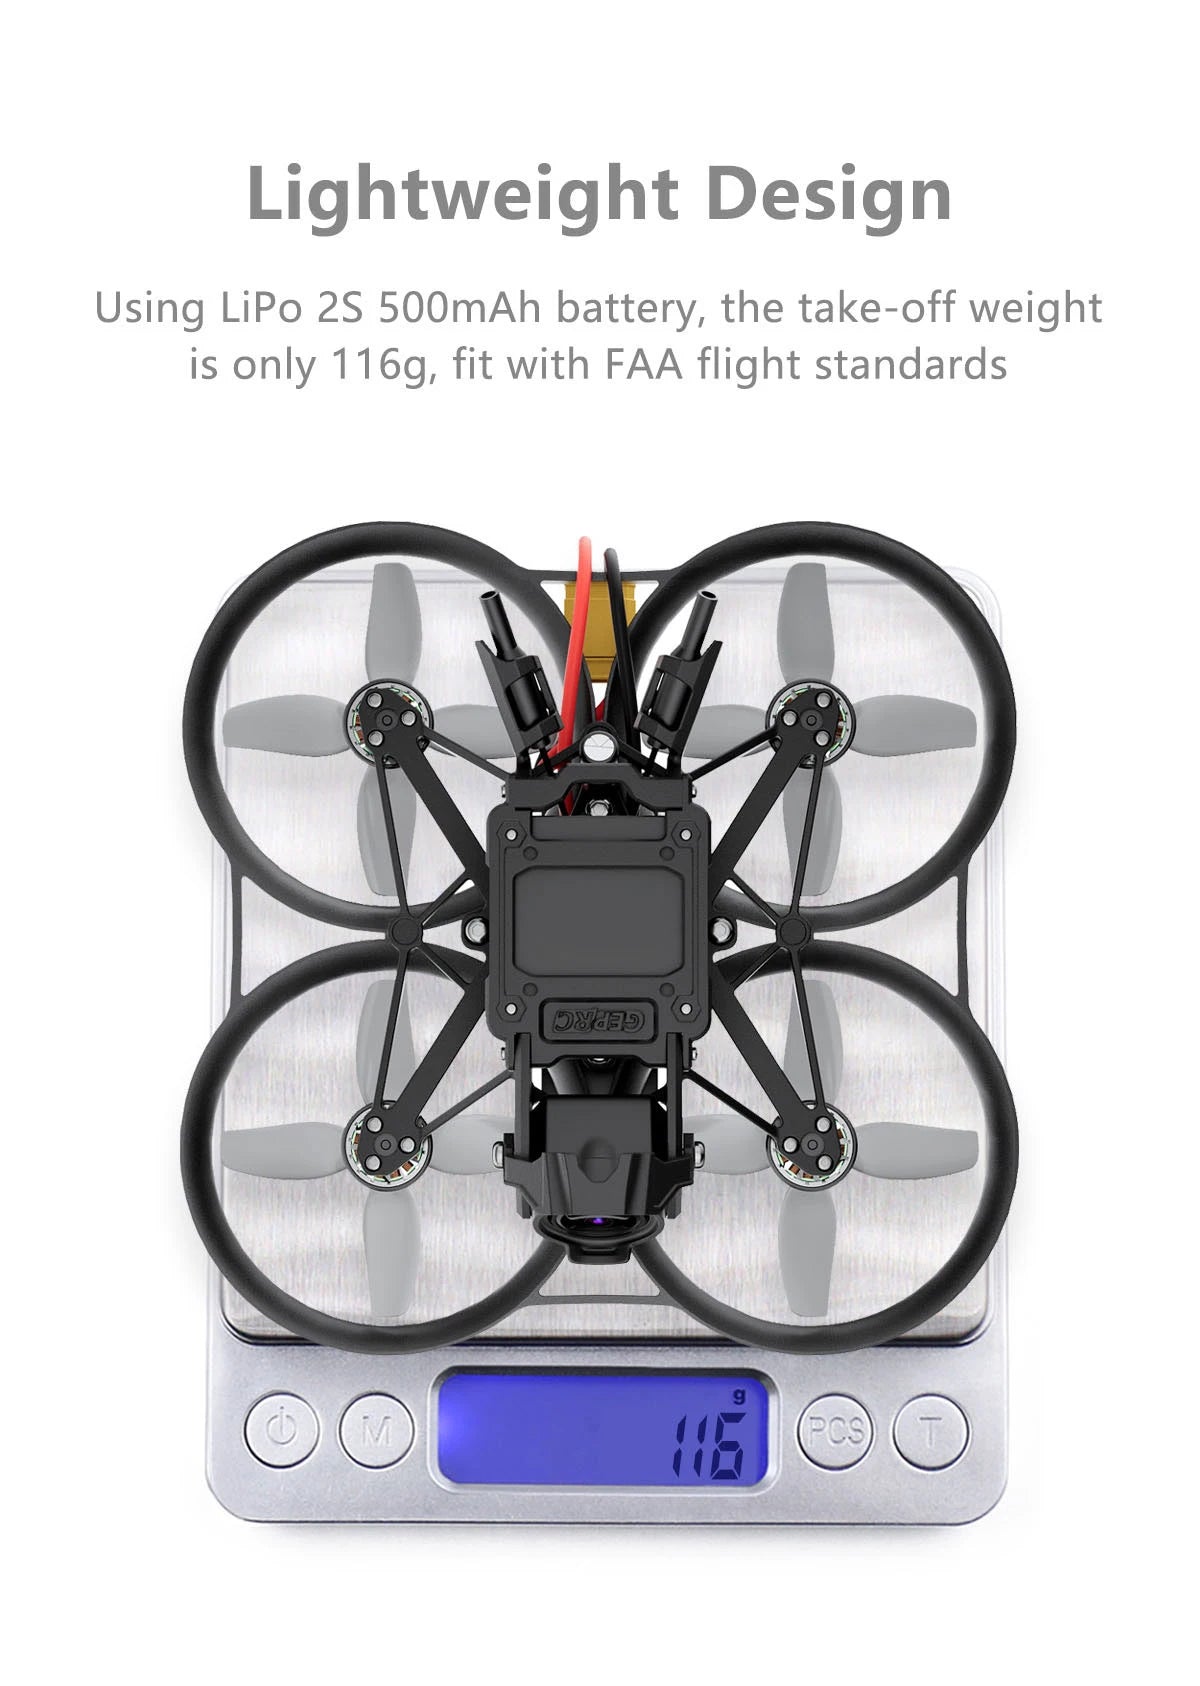 GEPRC DarkStar20 HD Wasp FPV, Lightweight Design LiPo 2S 50OmAh battery, the take-off weight is